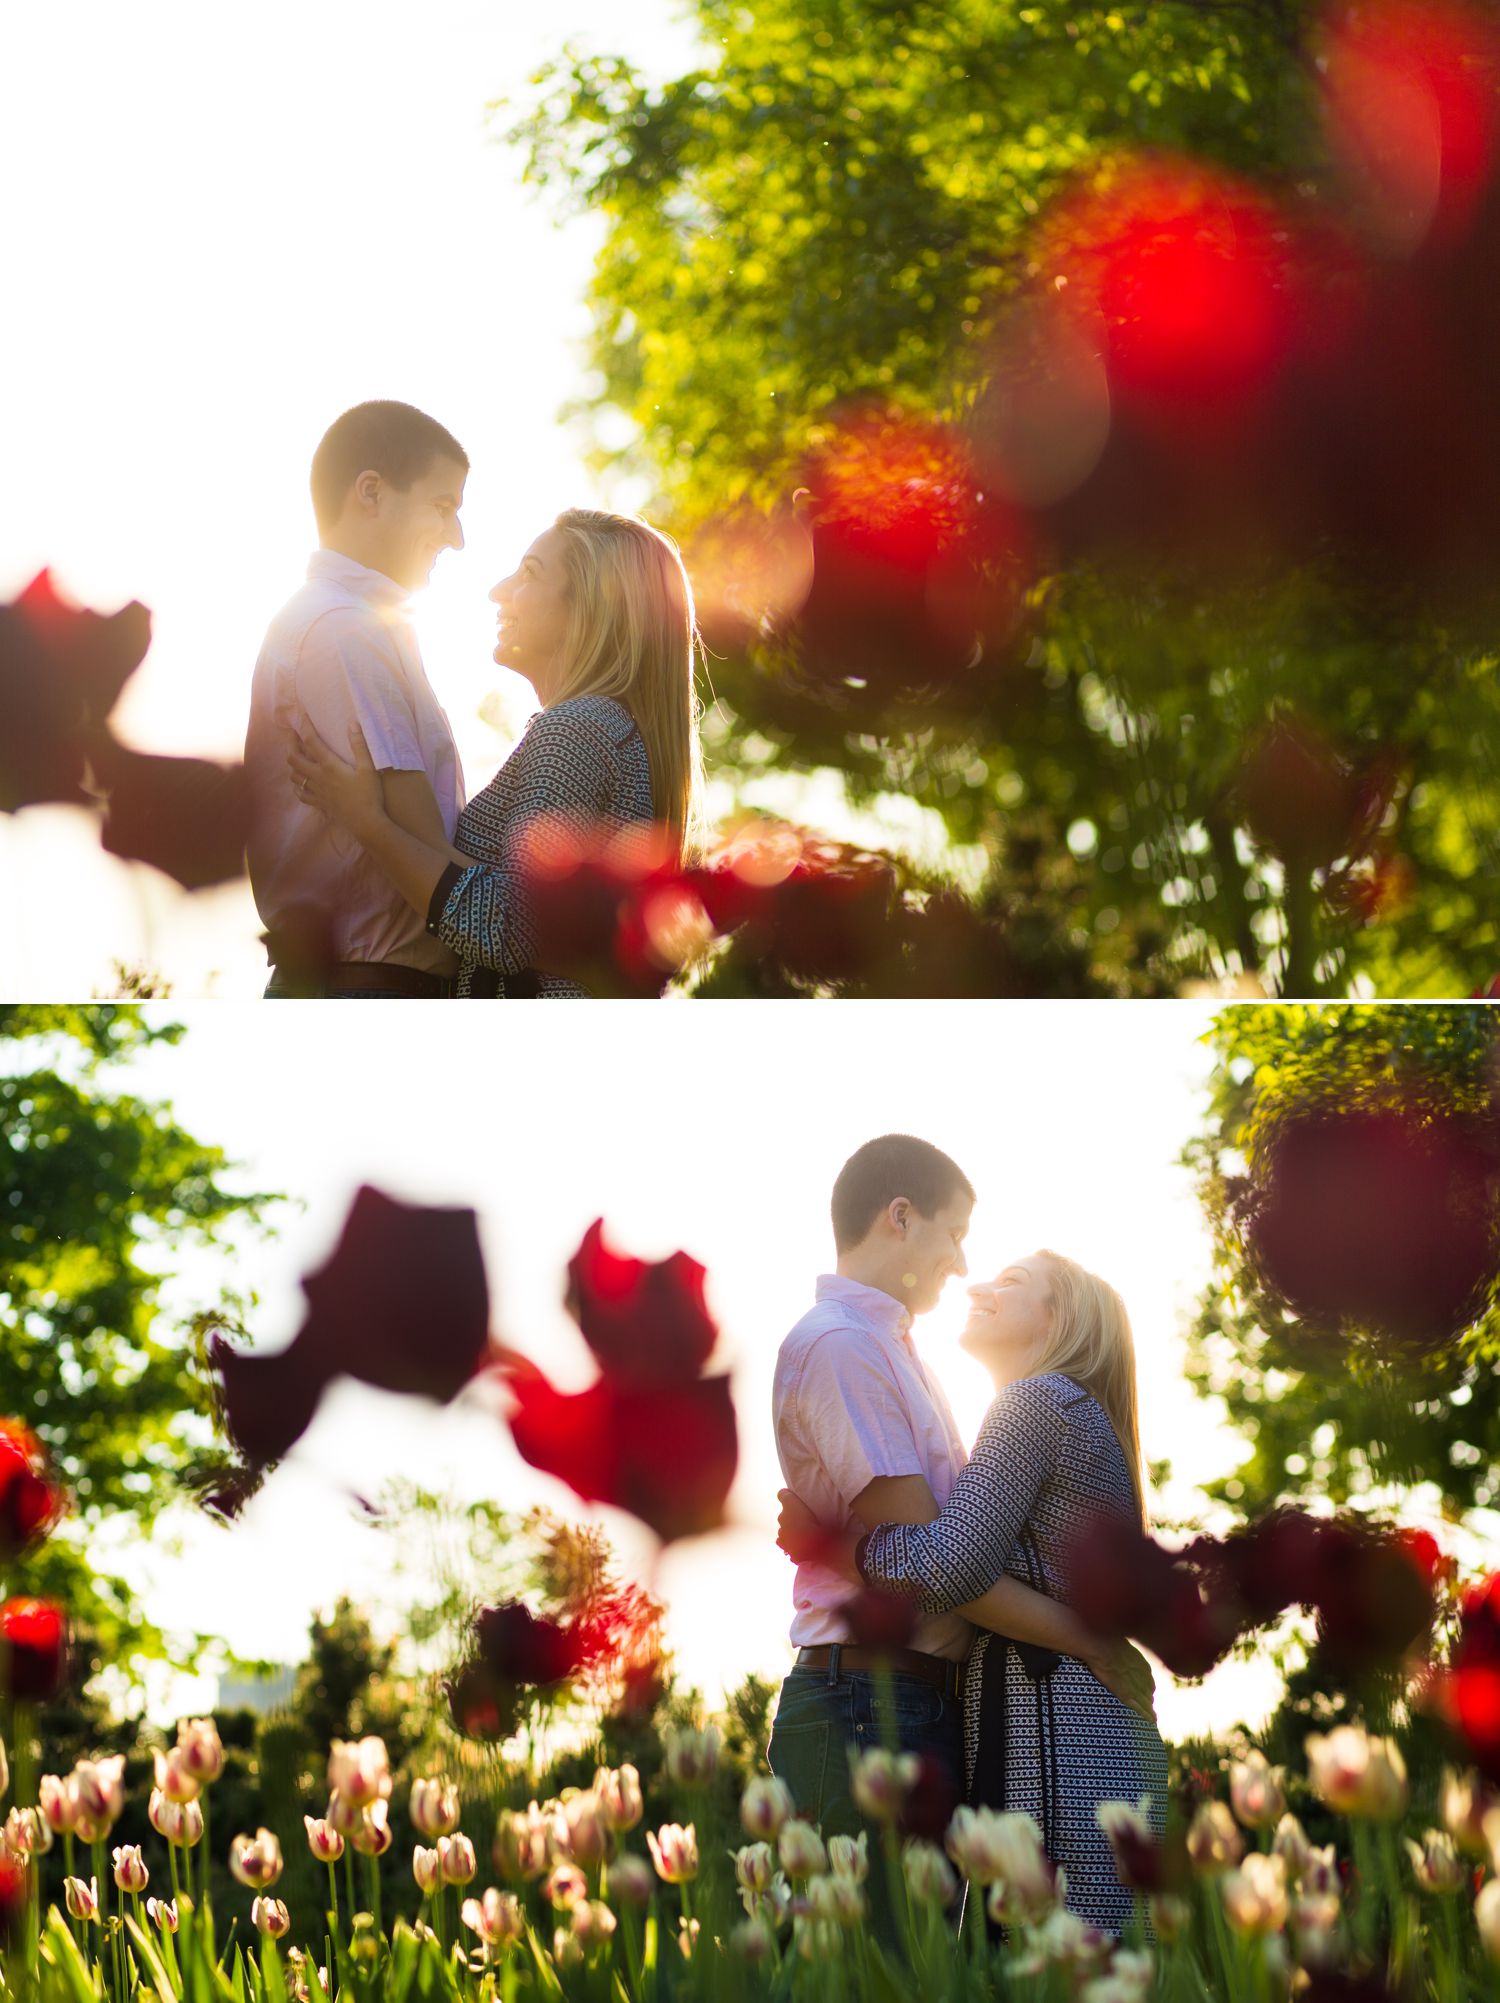 Photos from an engagement shoot in downtown Ottawa amongst the tulips